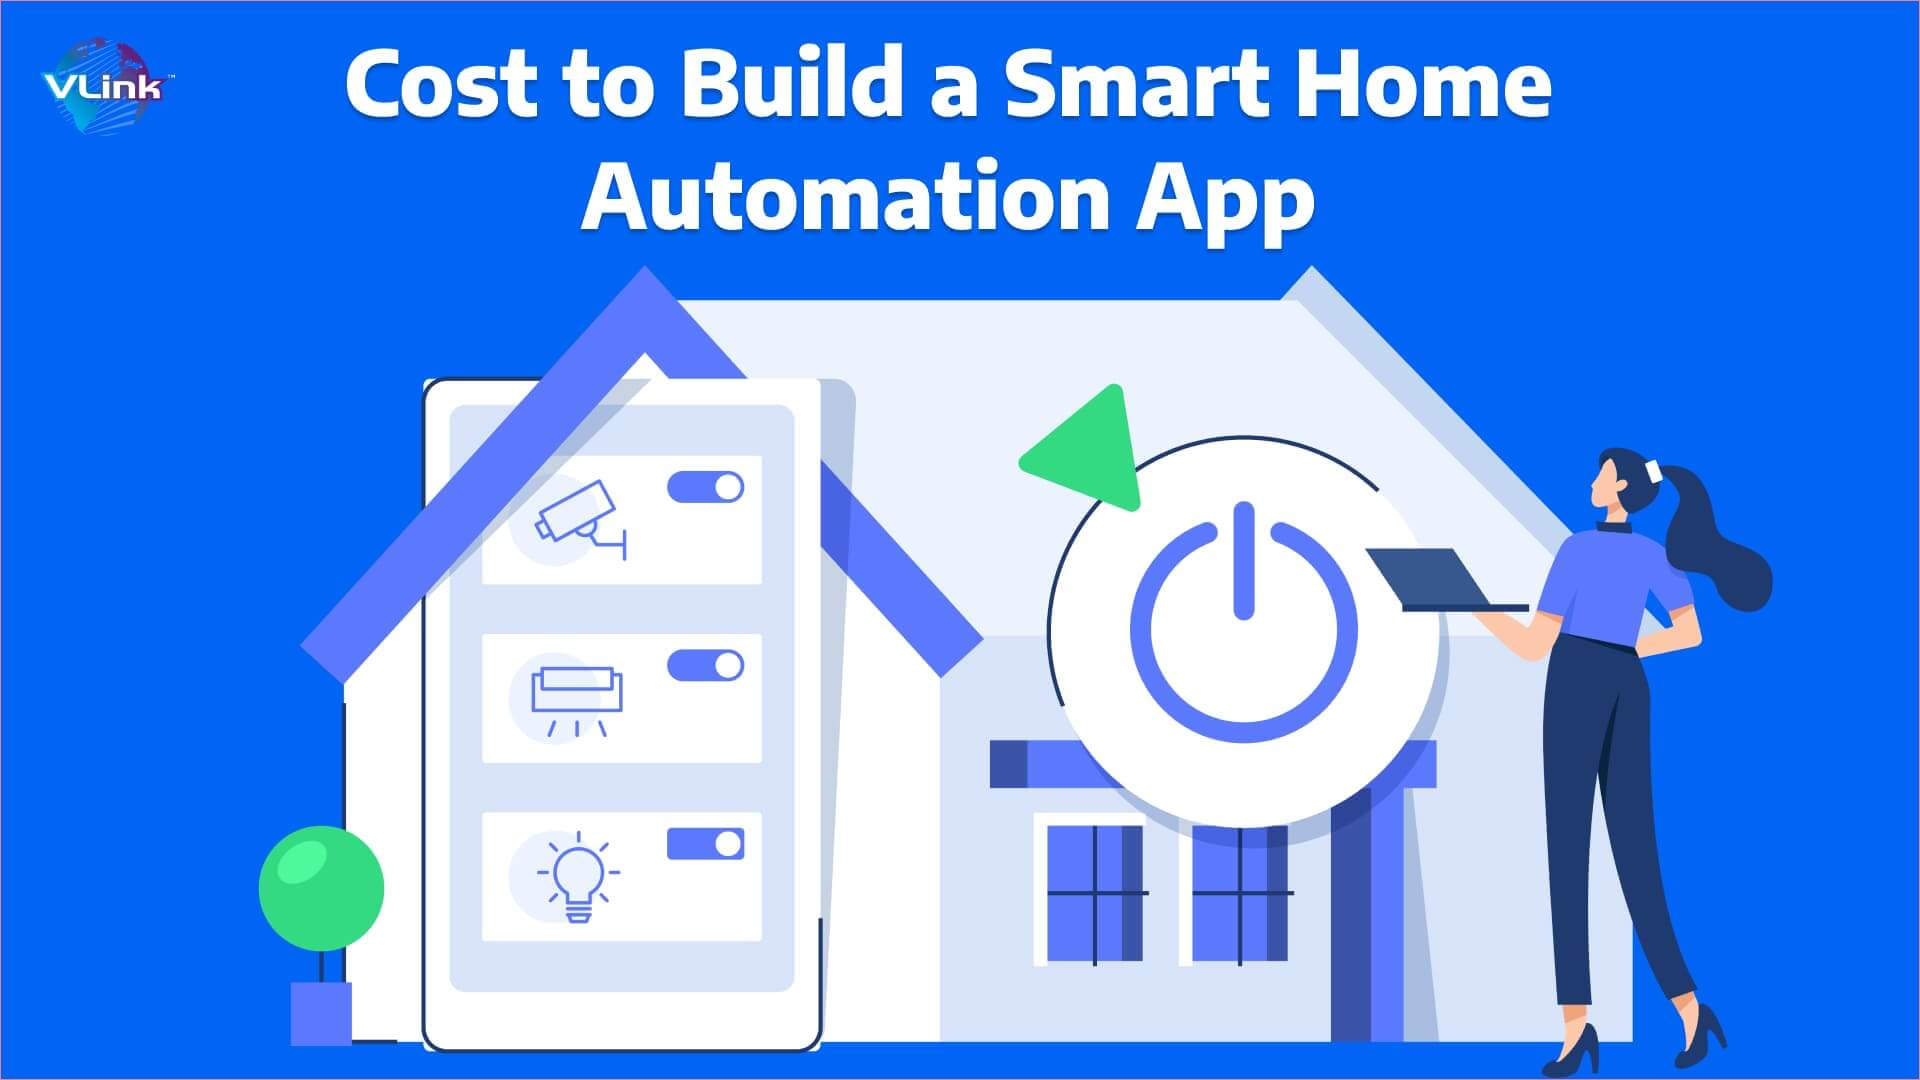 How Much Does It Cost to Build a Smart Home Automation App?